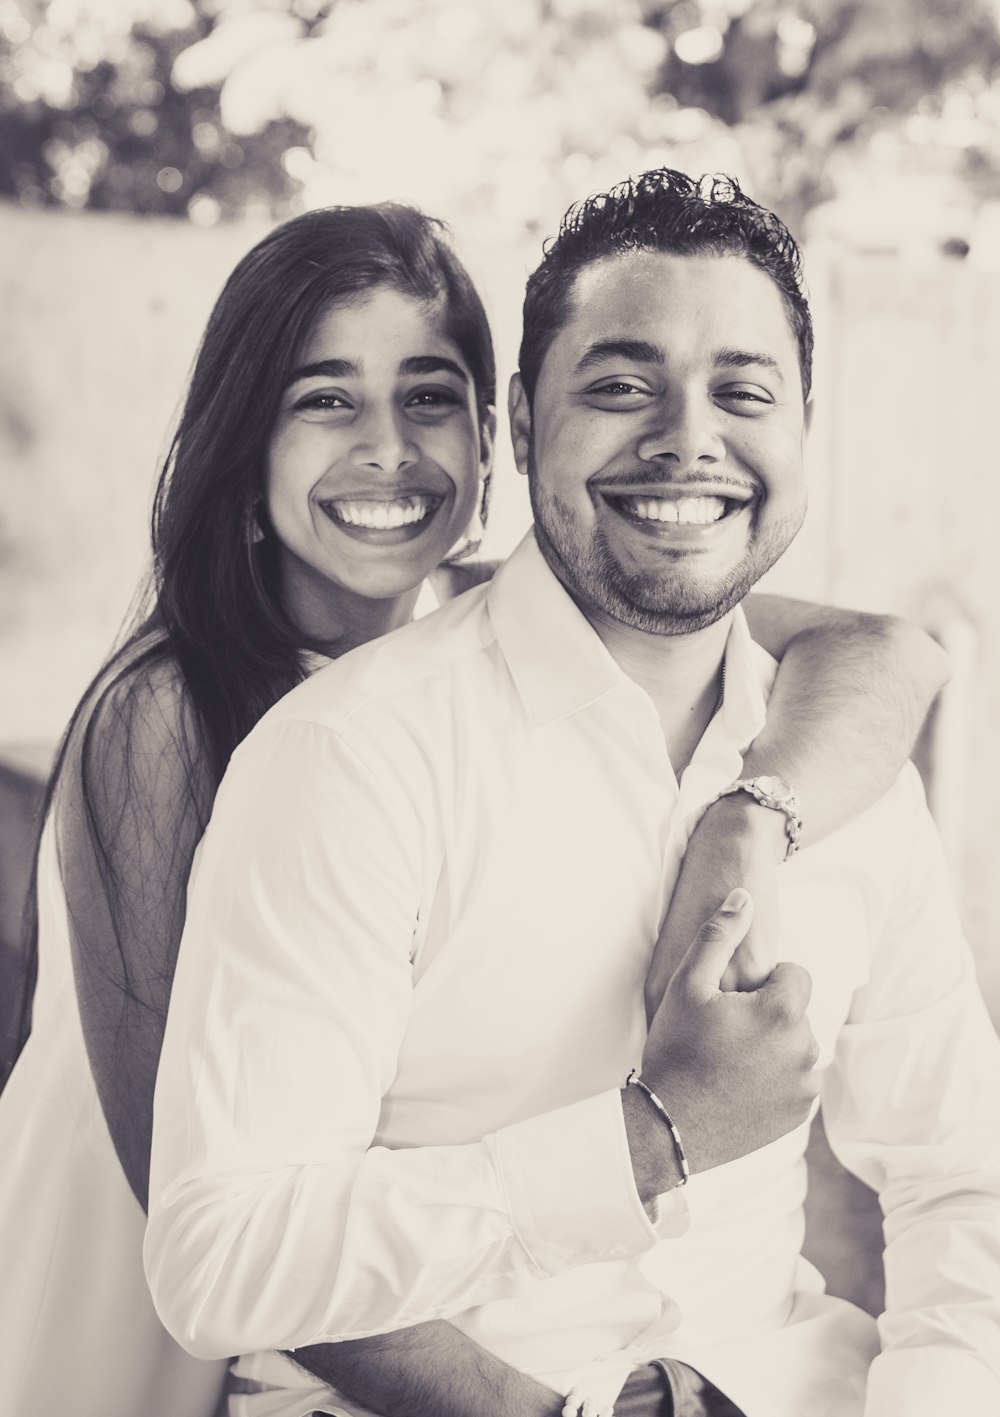 man in white dress shirt smiling beside woman in gray scarf